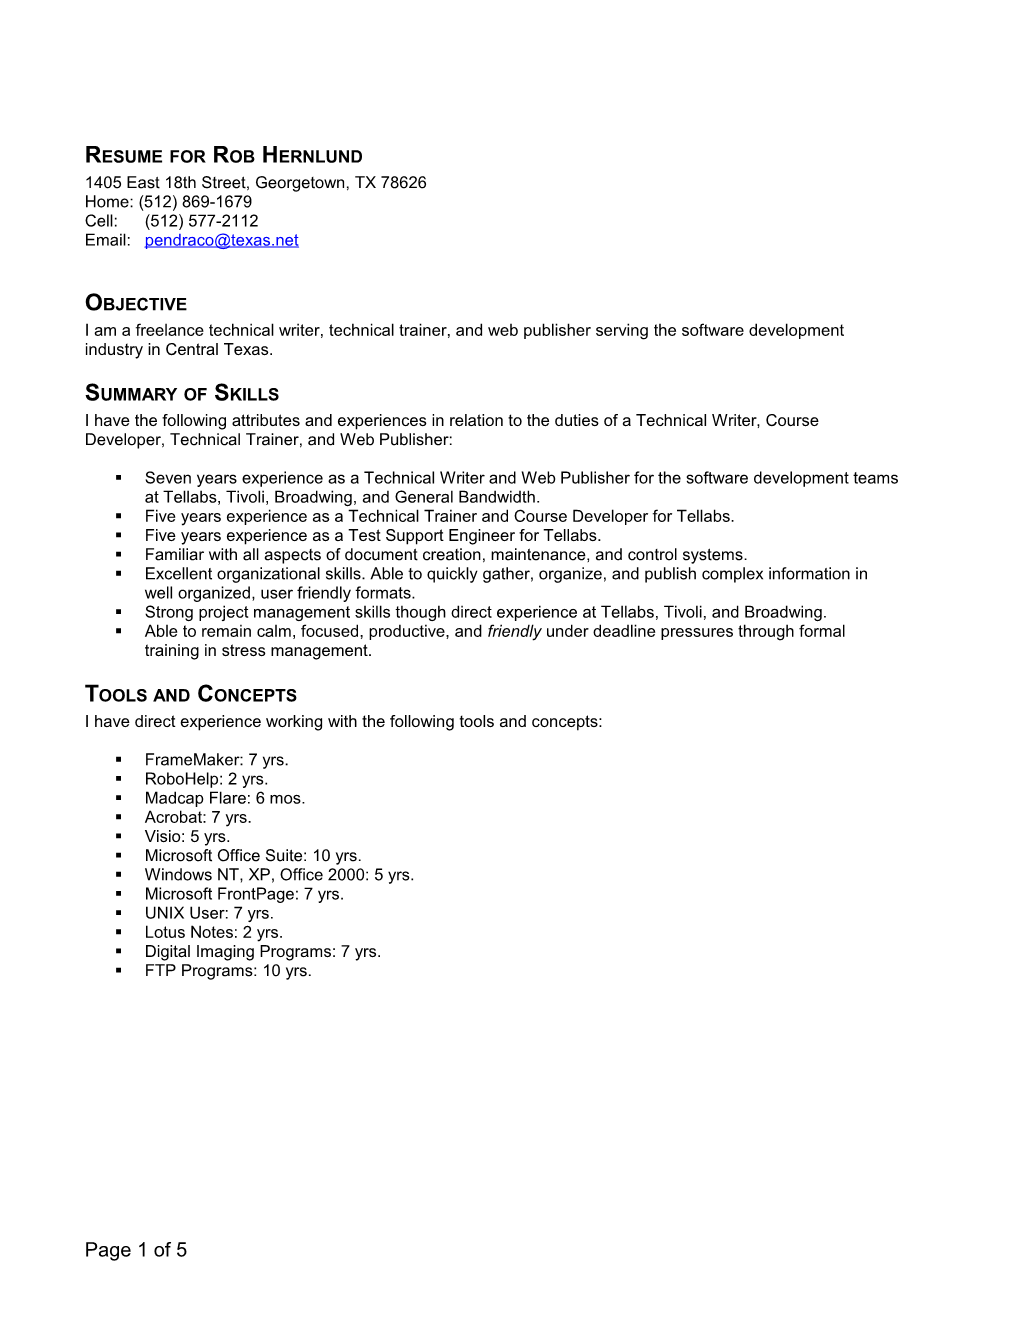 Resume for Rob Hernlund